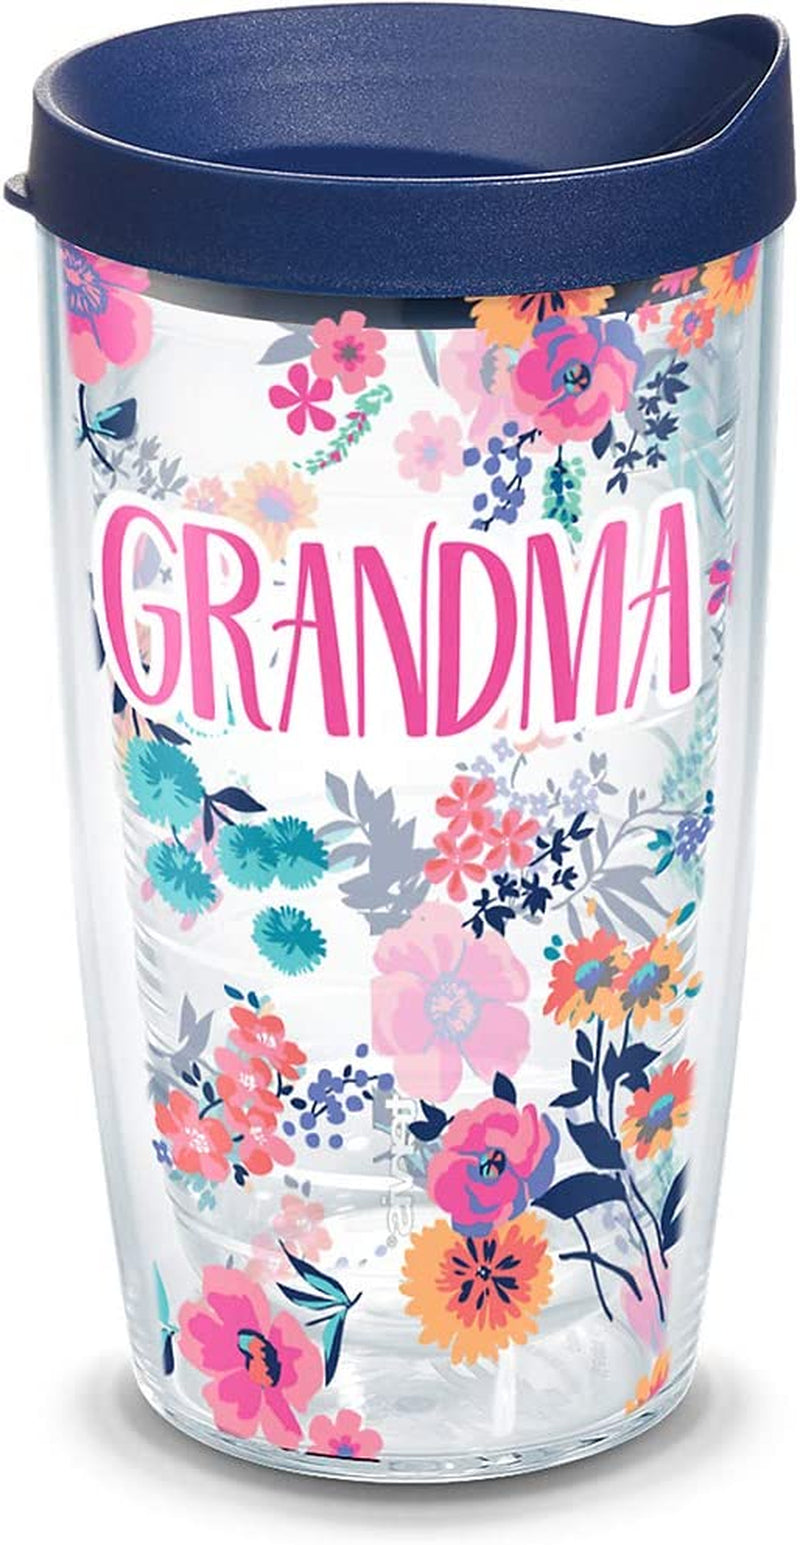 Tervis Made in USA Double Walled Dainty Floral Mother'S Day Insulated Tumbler Cup Keeps Drinks Cold & Hot, 16Oz, Gigi Home & Garden > Kitchen & Dining > Tableware > Drinkware Tervis Grandma 16oz 